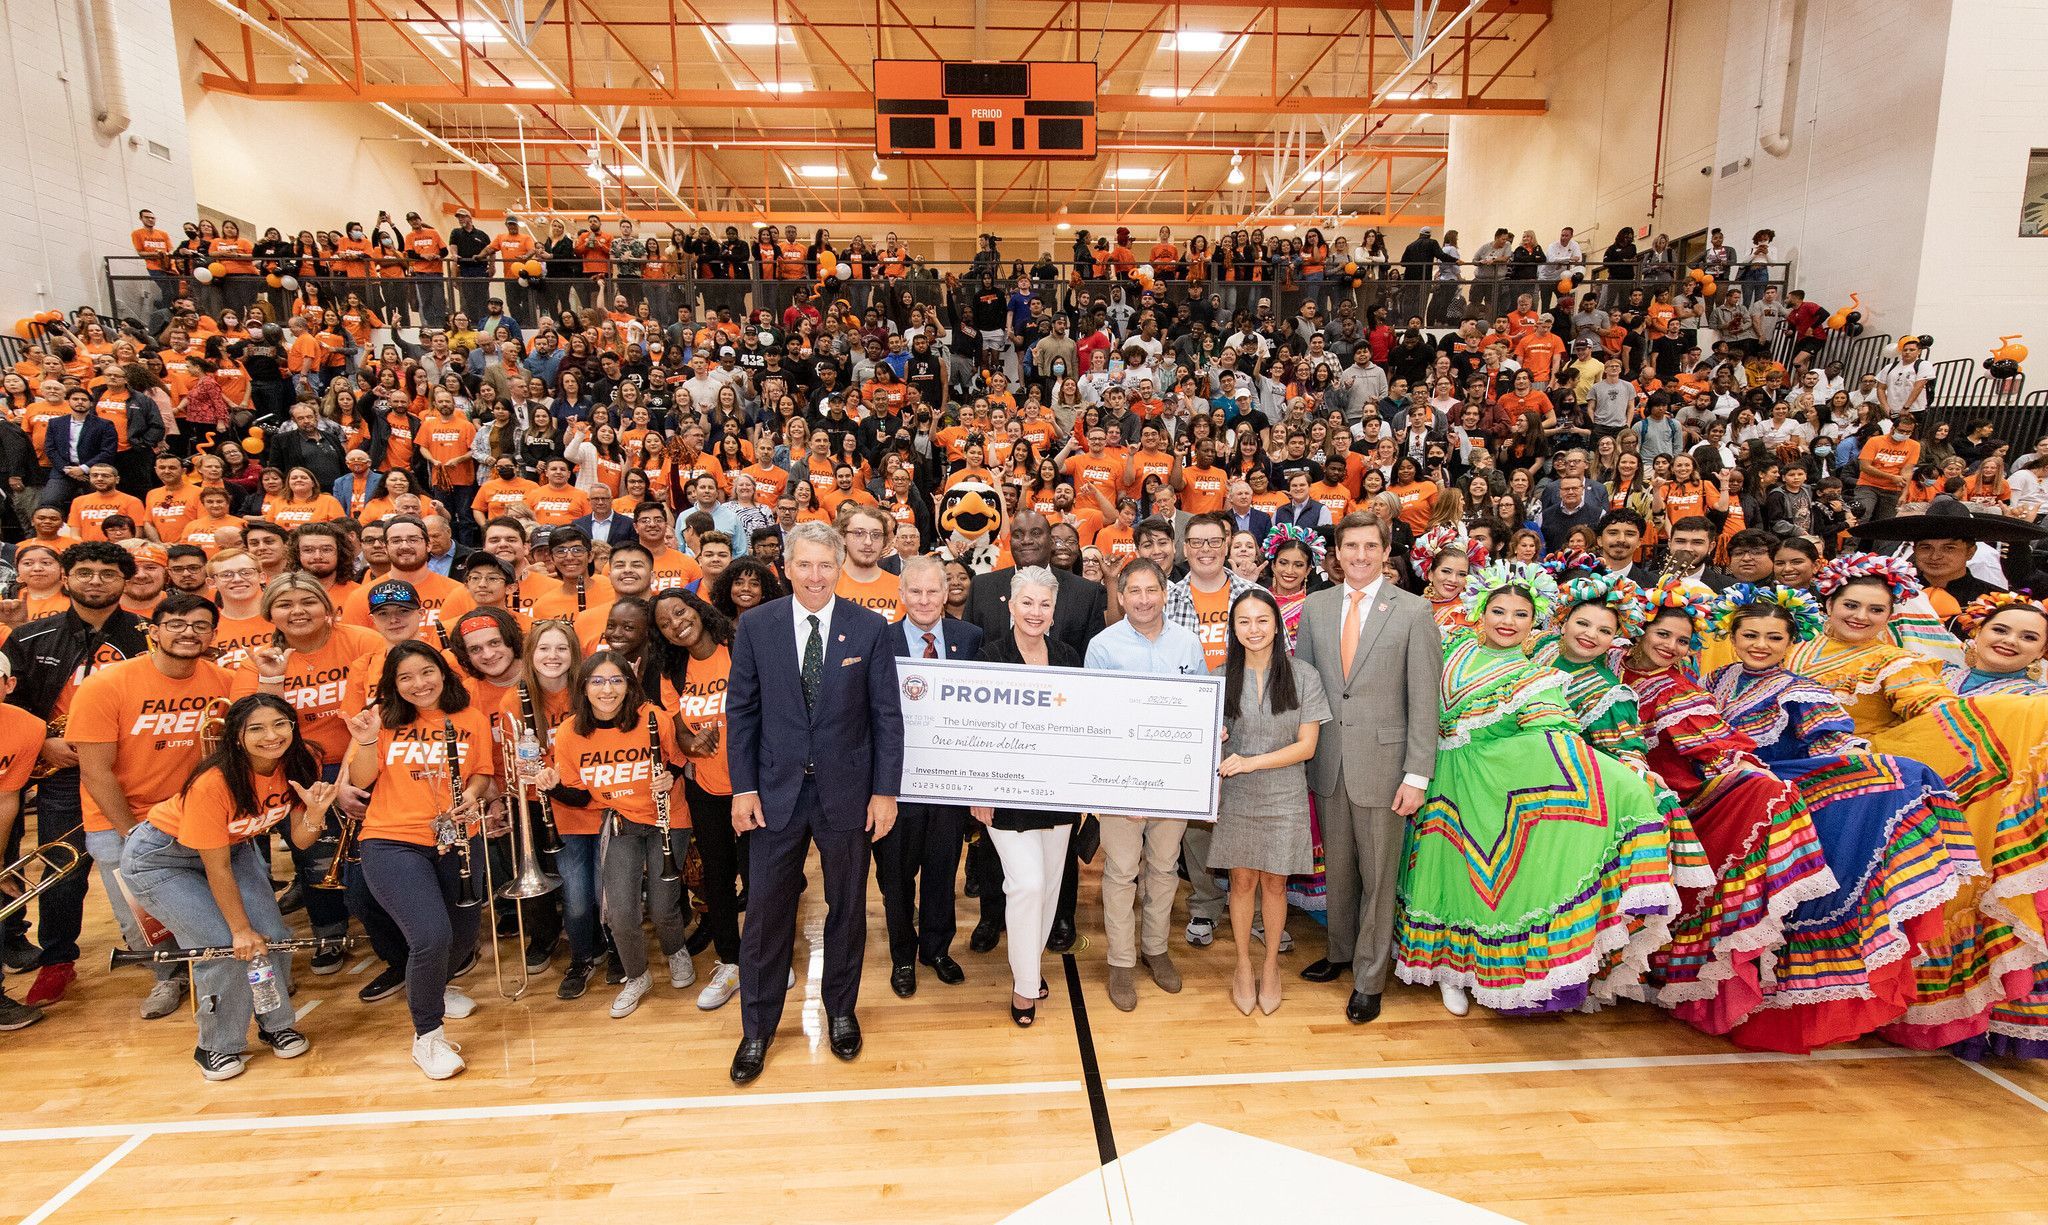 Falcon Free pep-rally group picture in UTPB gym